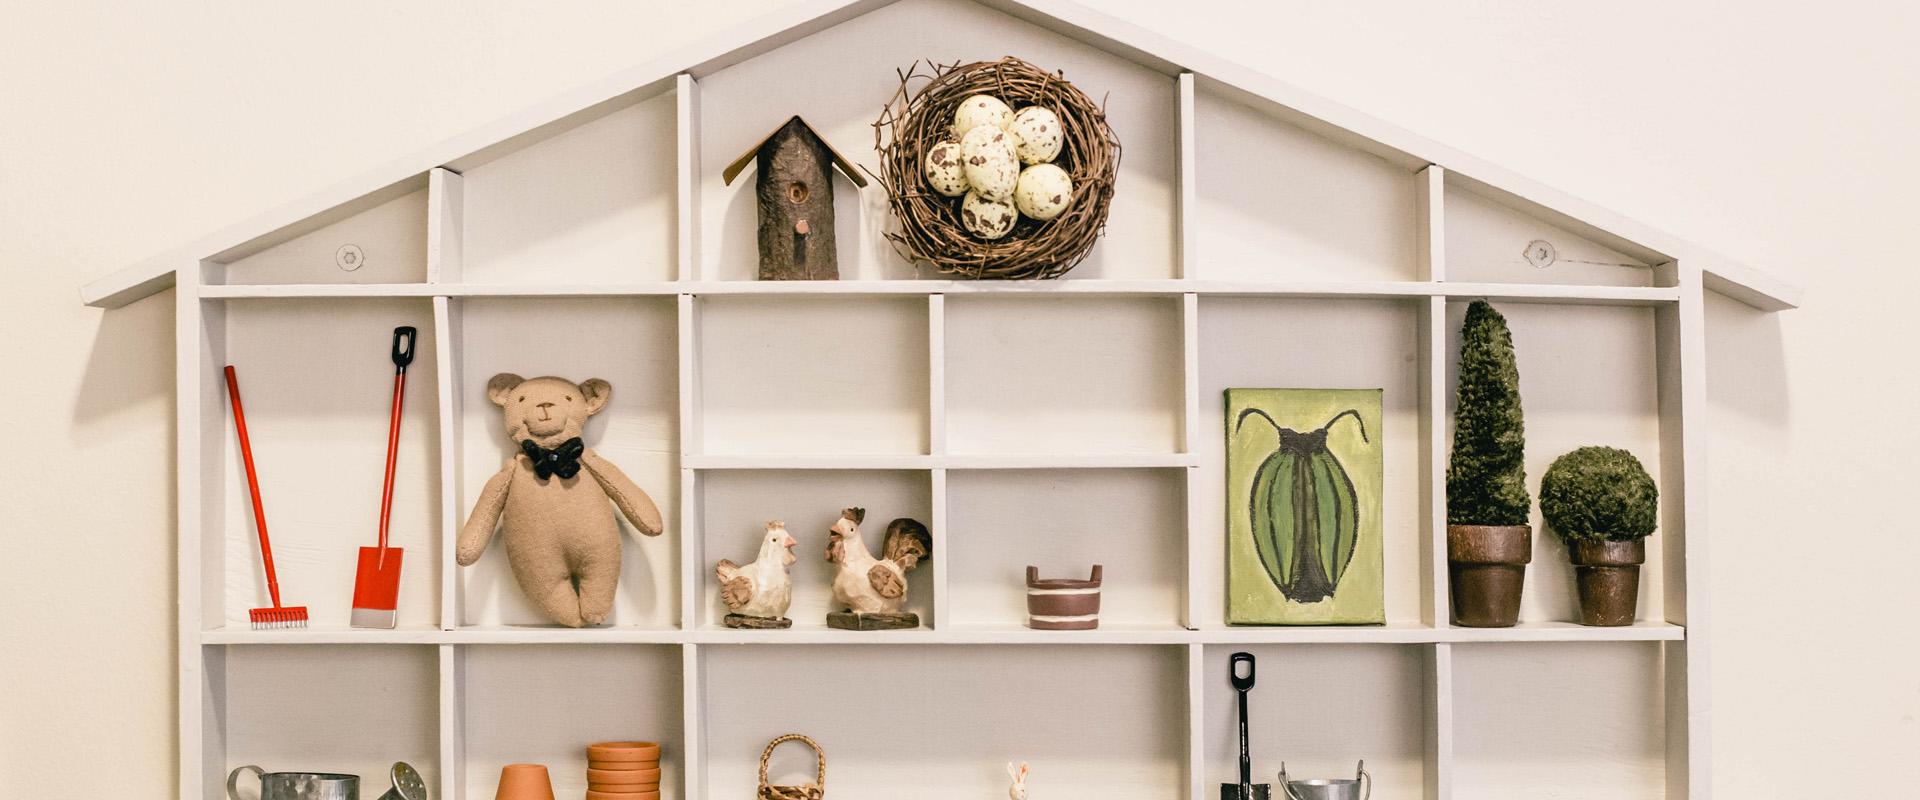 Studio shop Karud ja Pojad, tiny house-shaped shelf with miniatures, bird's nest, birdhouse, small bear, tiny rake and shovels, rooster, chicken, beetle painting, textile potted plants, bucket, watering can, flower pots